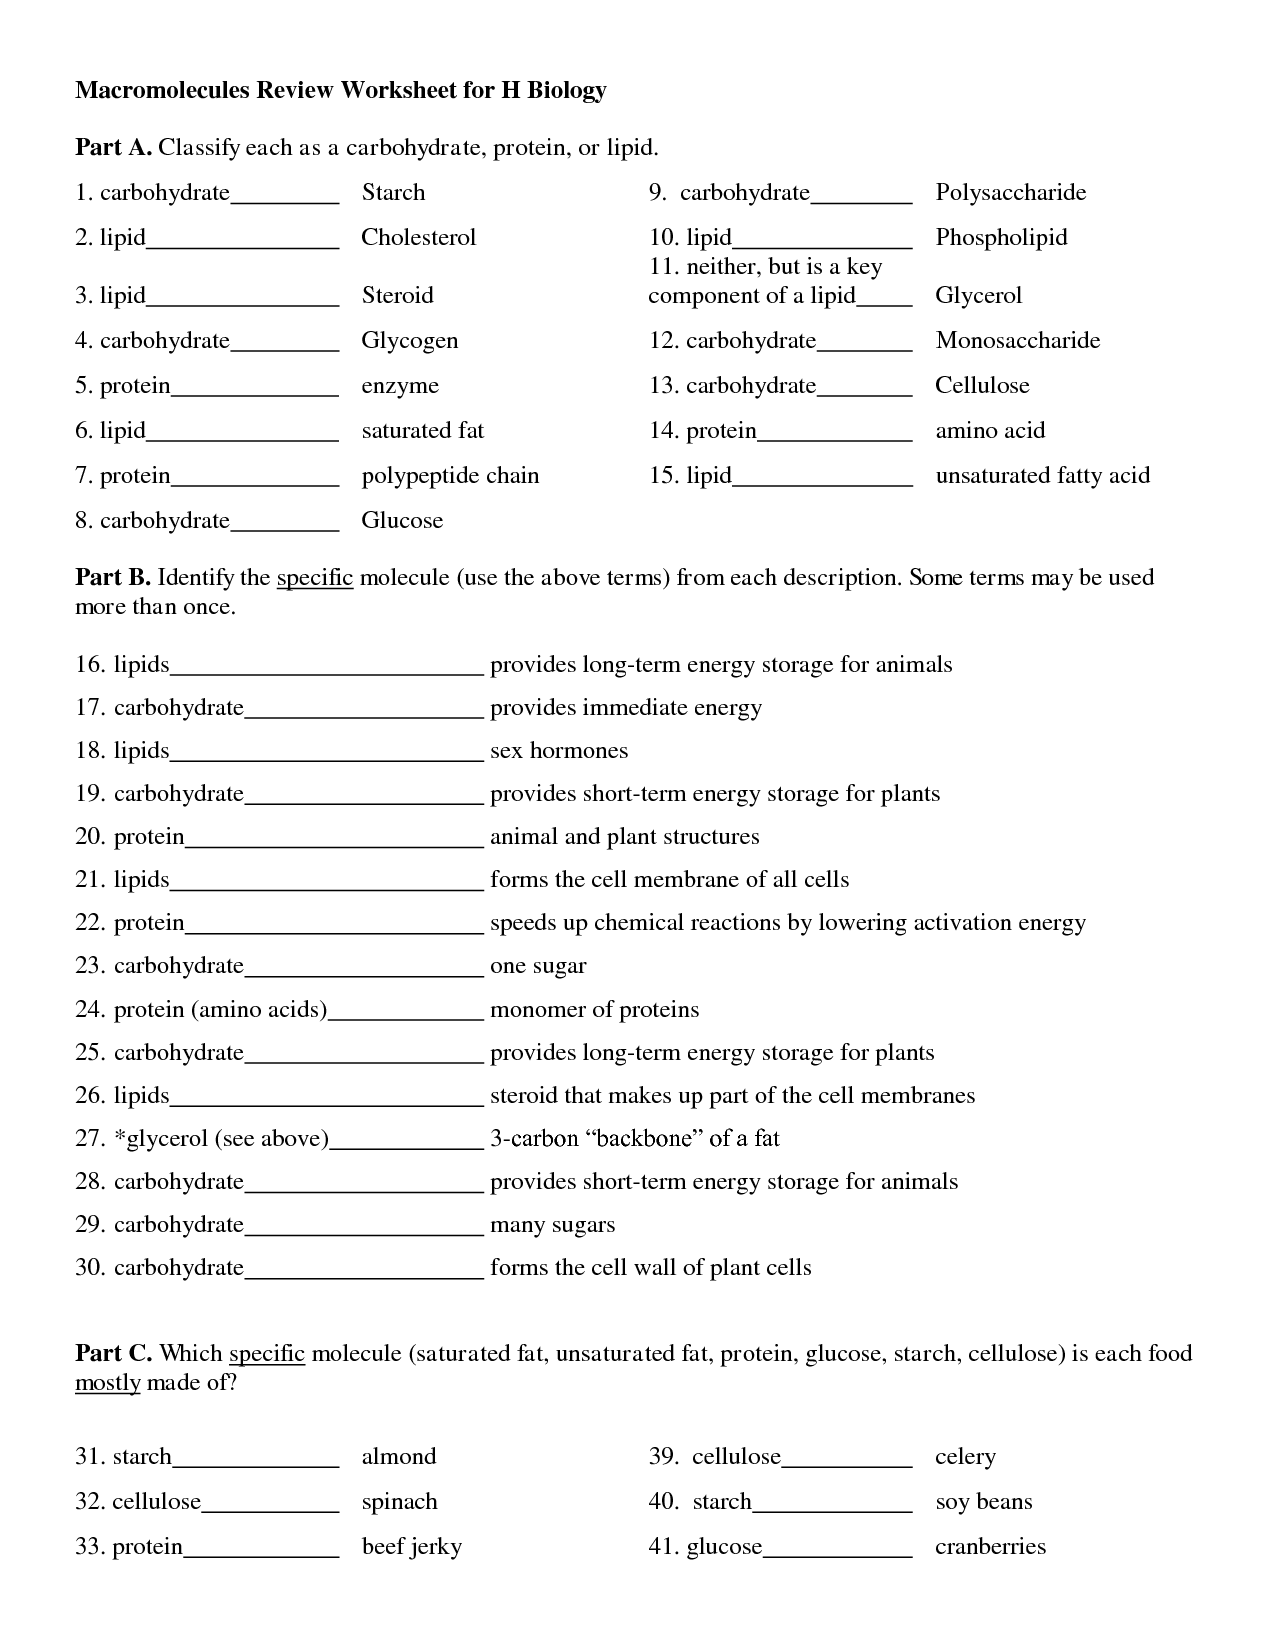 19-best-images-of-history-worksheets-with-answer-keys-periodic-table-worksheet-answer-key